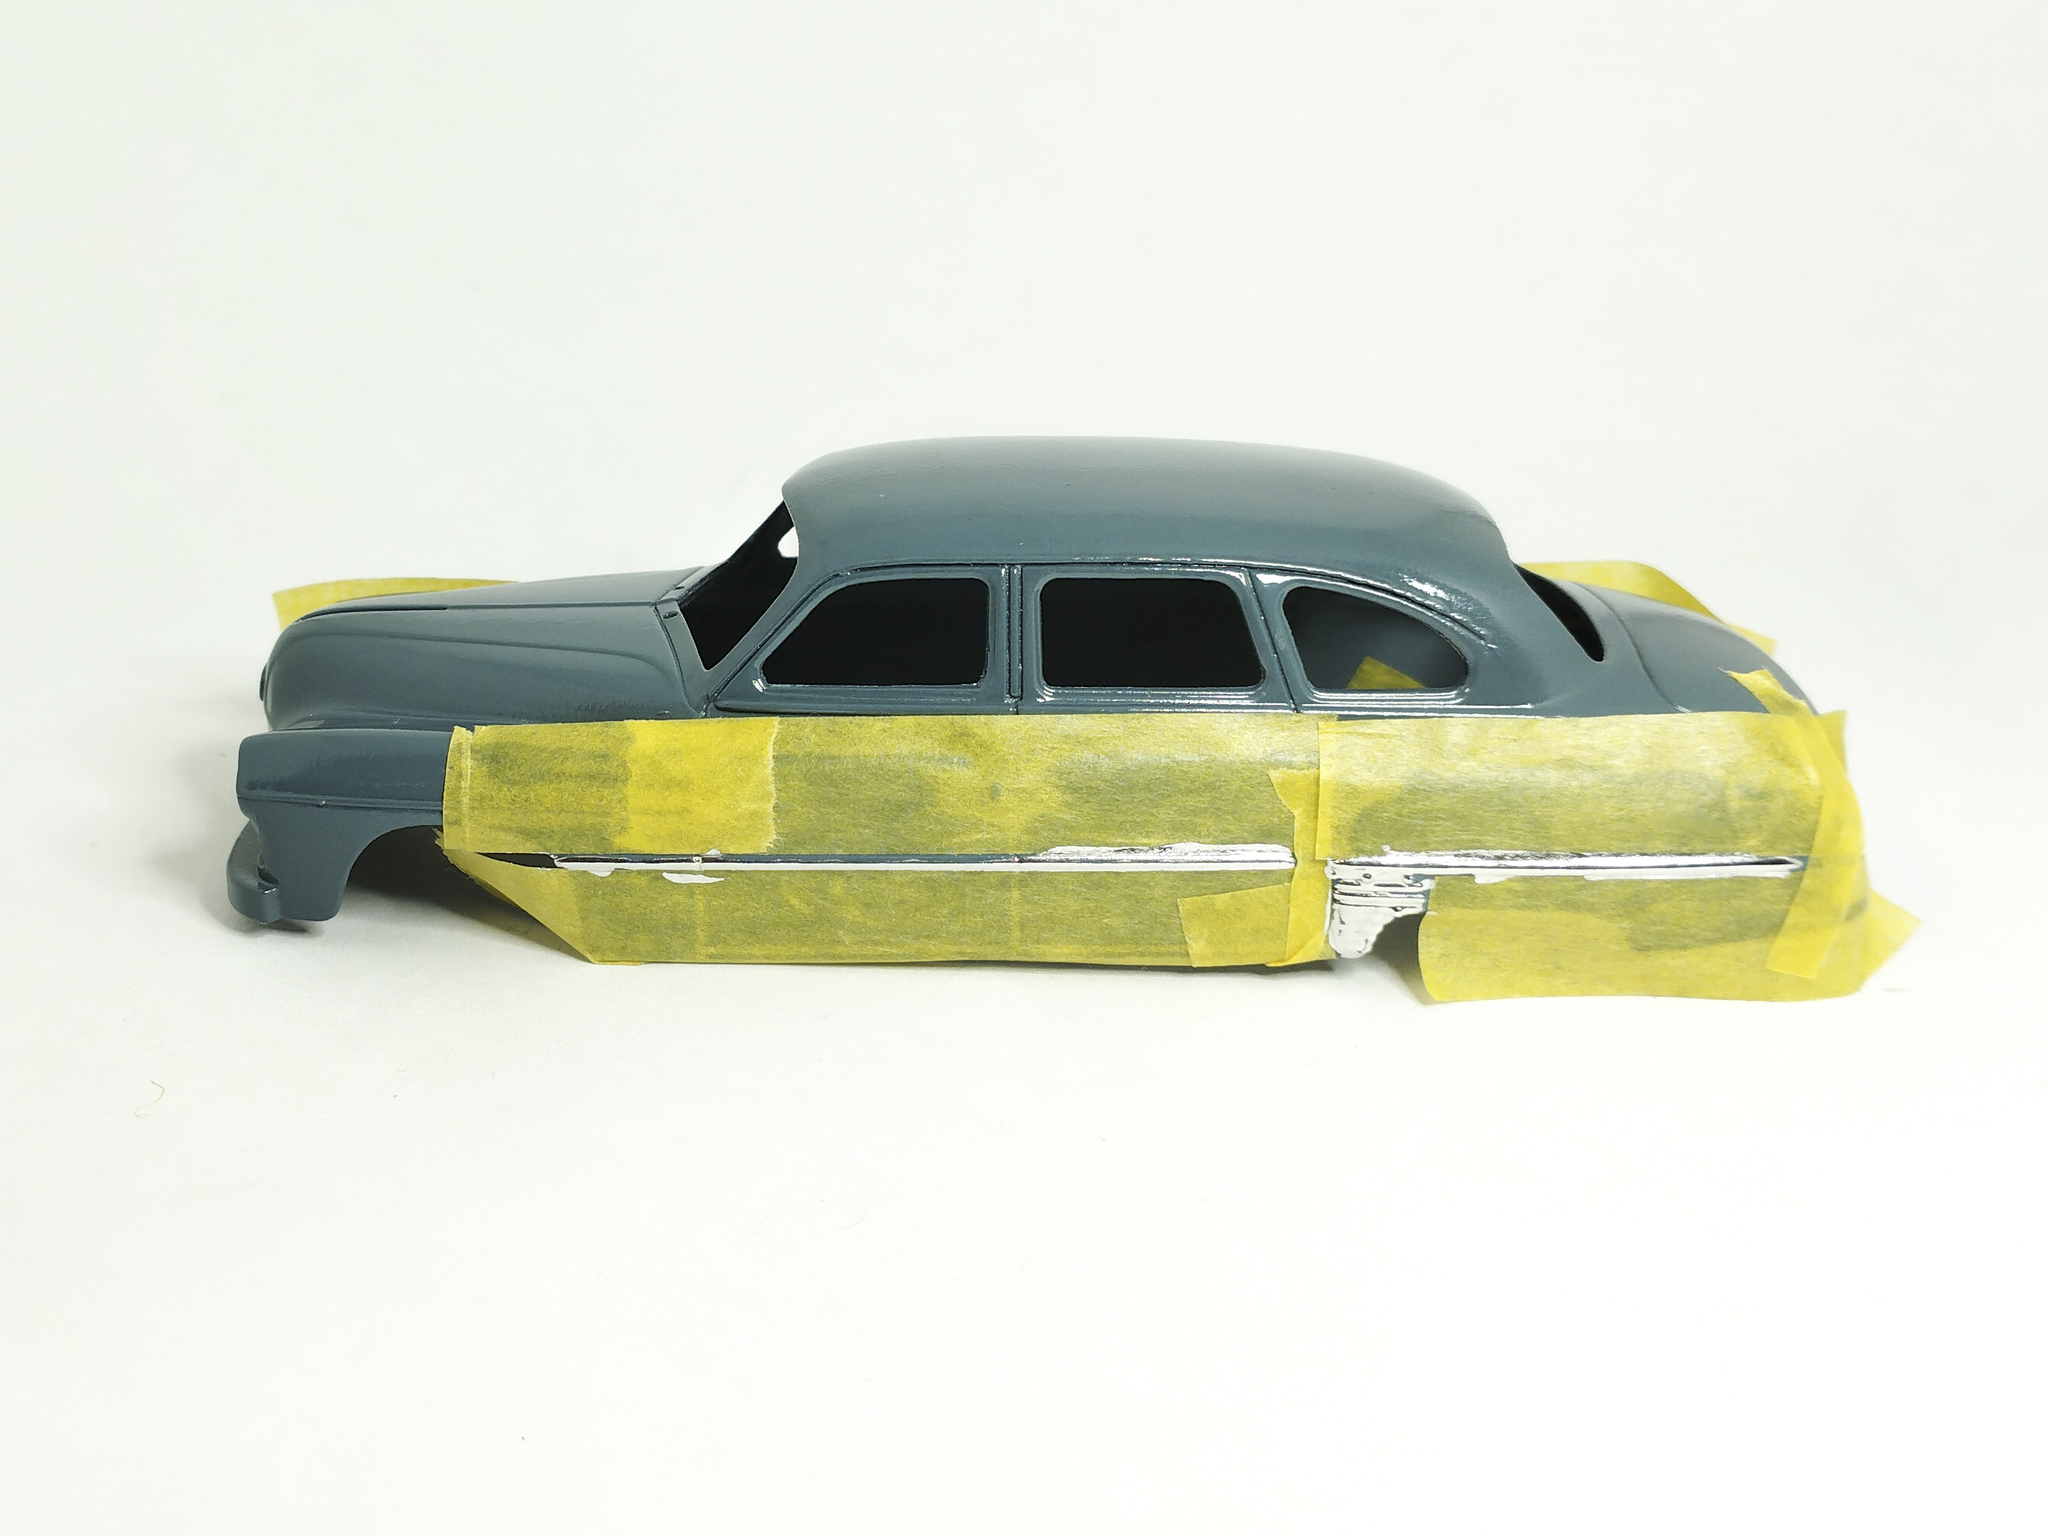 Conversion of the GAZ-12 ZIM - Taxi model on a scale of 1:43 - My, Collecting, Modeling, Collection, Conversion, Stand modeling, Painting miniatures, Winter, Deagostini, Scalemodels, Domestic auto industry, Miniature, Tamiya, Dyeing, Airbrush, Longpost, Gaz-12